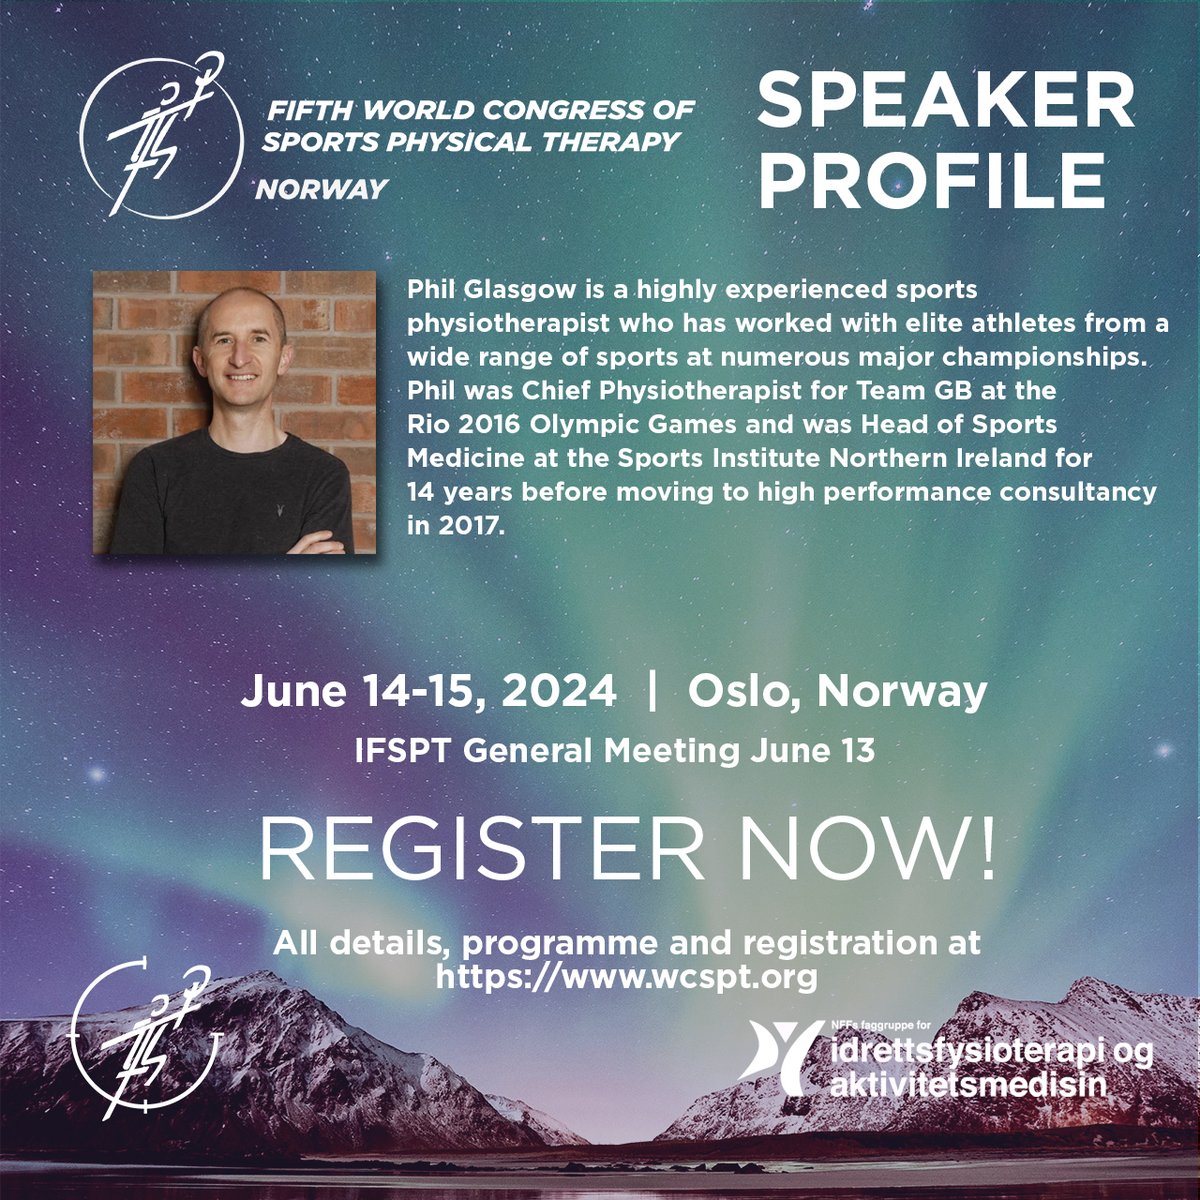 Join speaker Phil Glasgow at the Fifth World Congress of Sports Physical Therapy, June 14-15 in Oslo! Find all the details and registration here:> wcspt.org